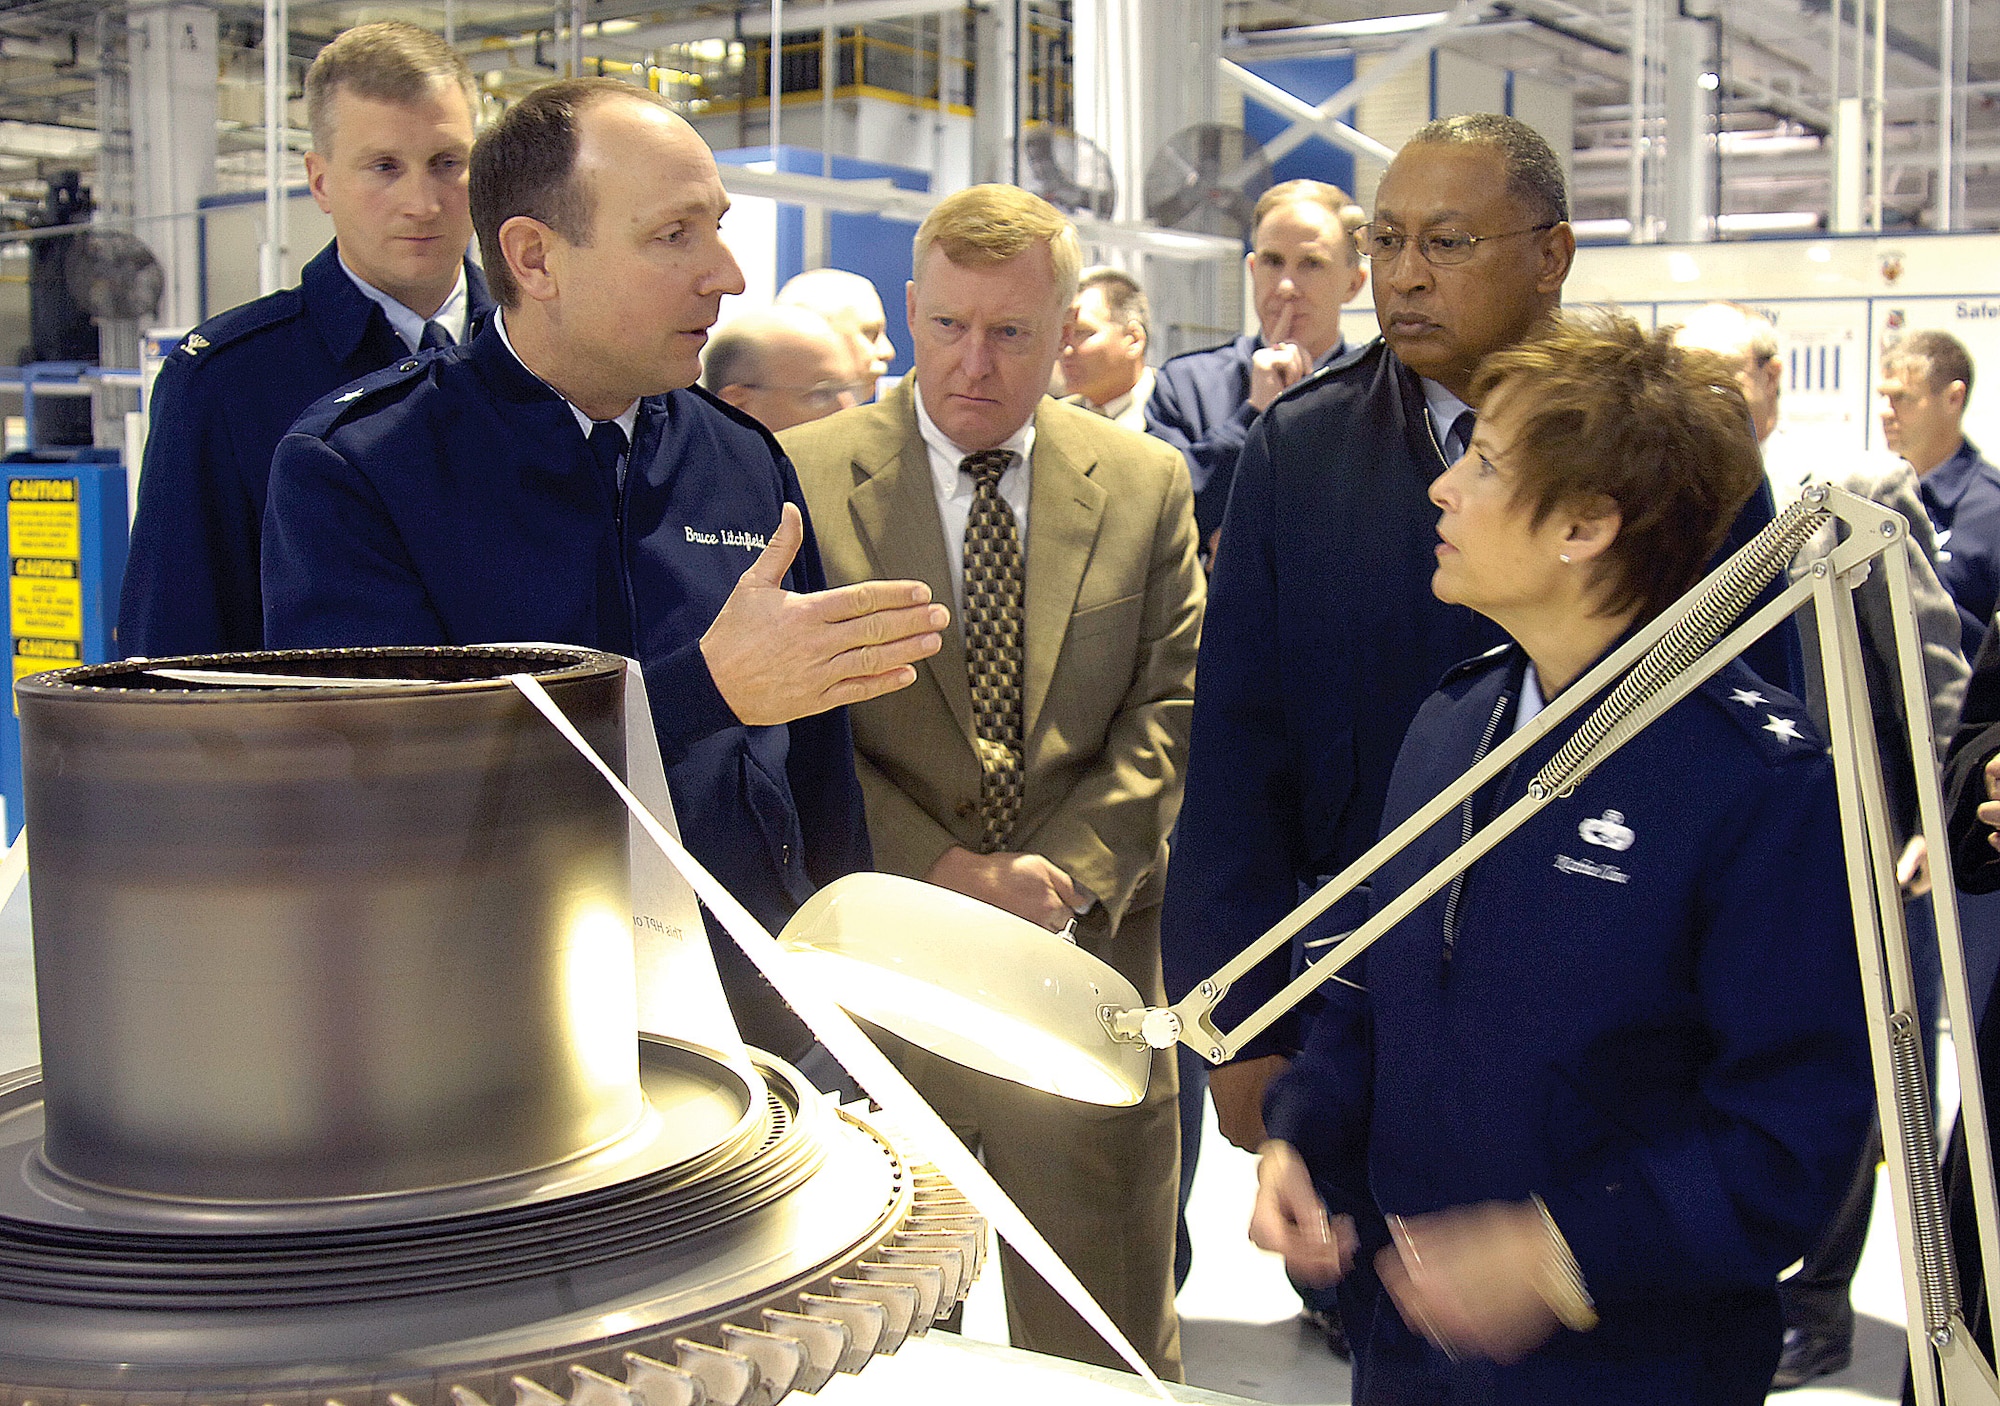 Brig. Gen. Bruce Litchfield, 76th Maintenance Wing commander, describes F101 engine repair issues with Maj. Gen. Kathleen Close, AFMC director of Logistics and Sustainment. Also listening, from far left are; Col. Evan Miller, Tinker’s 76th Propulsion Maintenance Group commander; James McGinley, AFMC Financial Management deputy director; and Maj. Gen. Gary McCoy, AFMC Air Force Global Logistics Support Center commander. Leaders from several areas across the Air Force gathered at Tinker Dec. 6-8 for the Repair Network Integration Update, working to find cost and time saving solutions as repair challenges evolve.  The F101 engine powers the B-1 bomber. (Air Force photo by Margo Wright)
